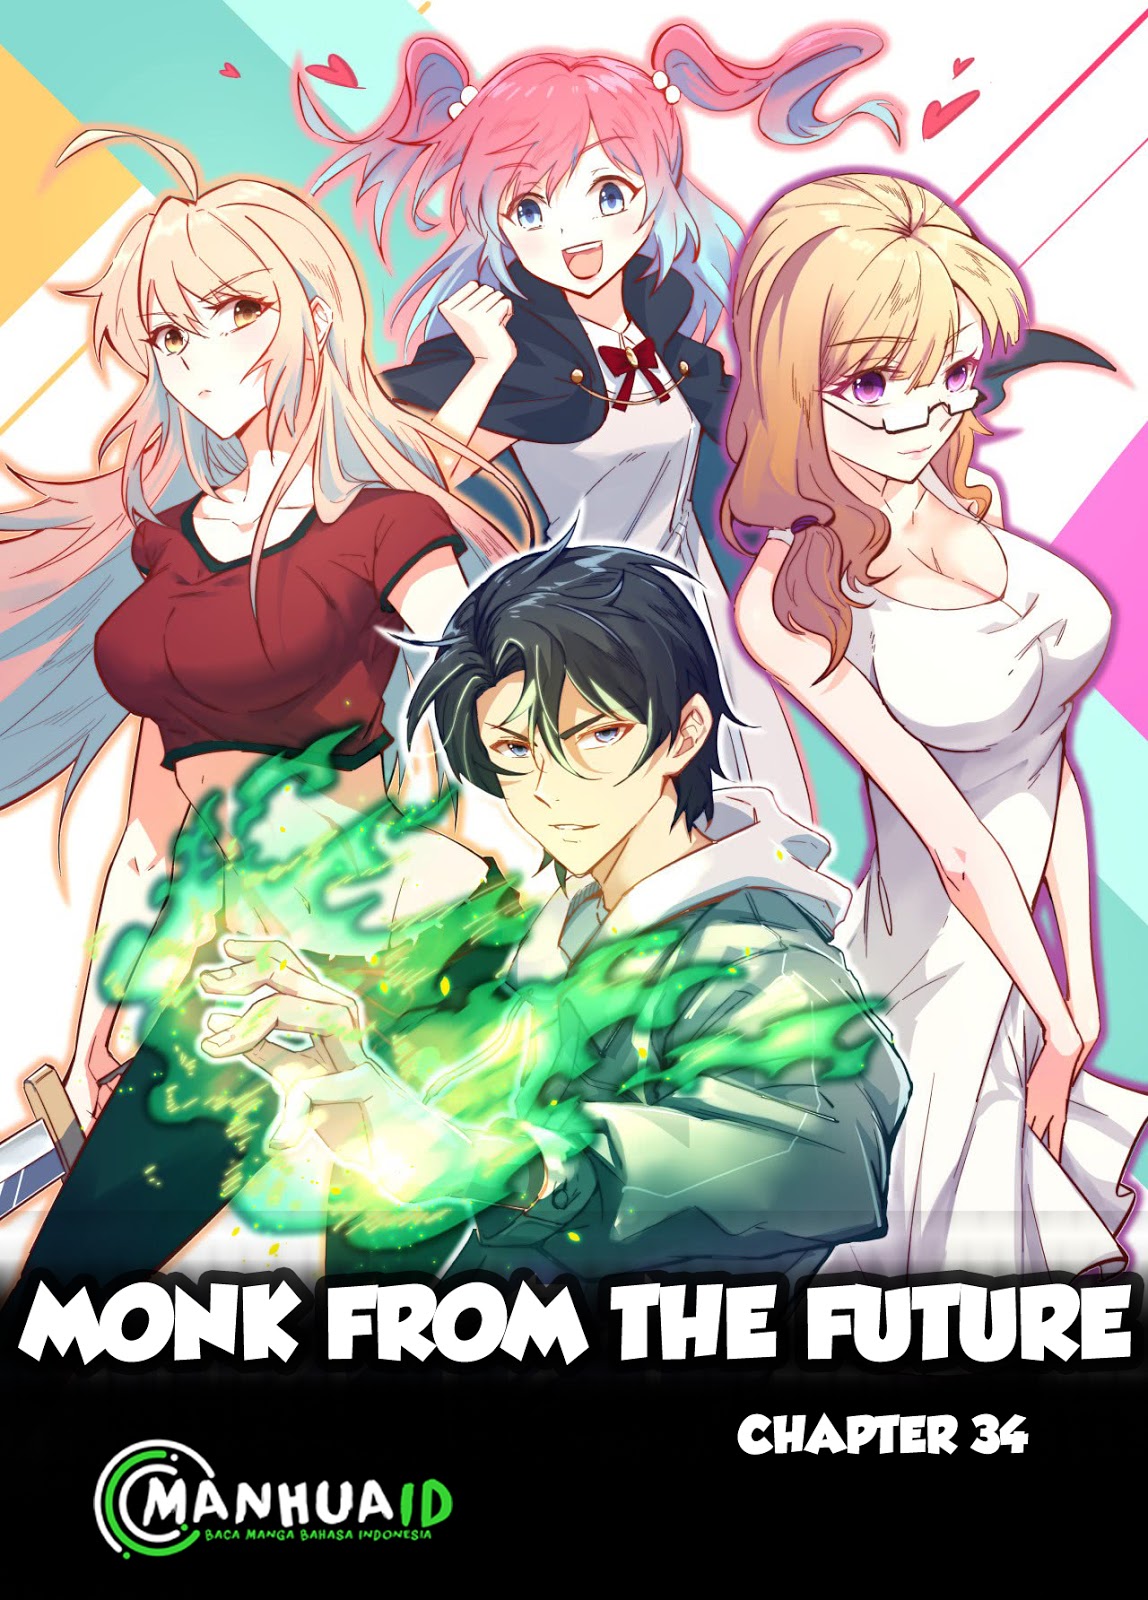 Monk From the Future Chapter 34